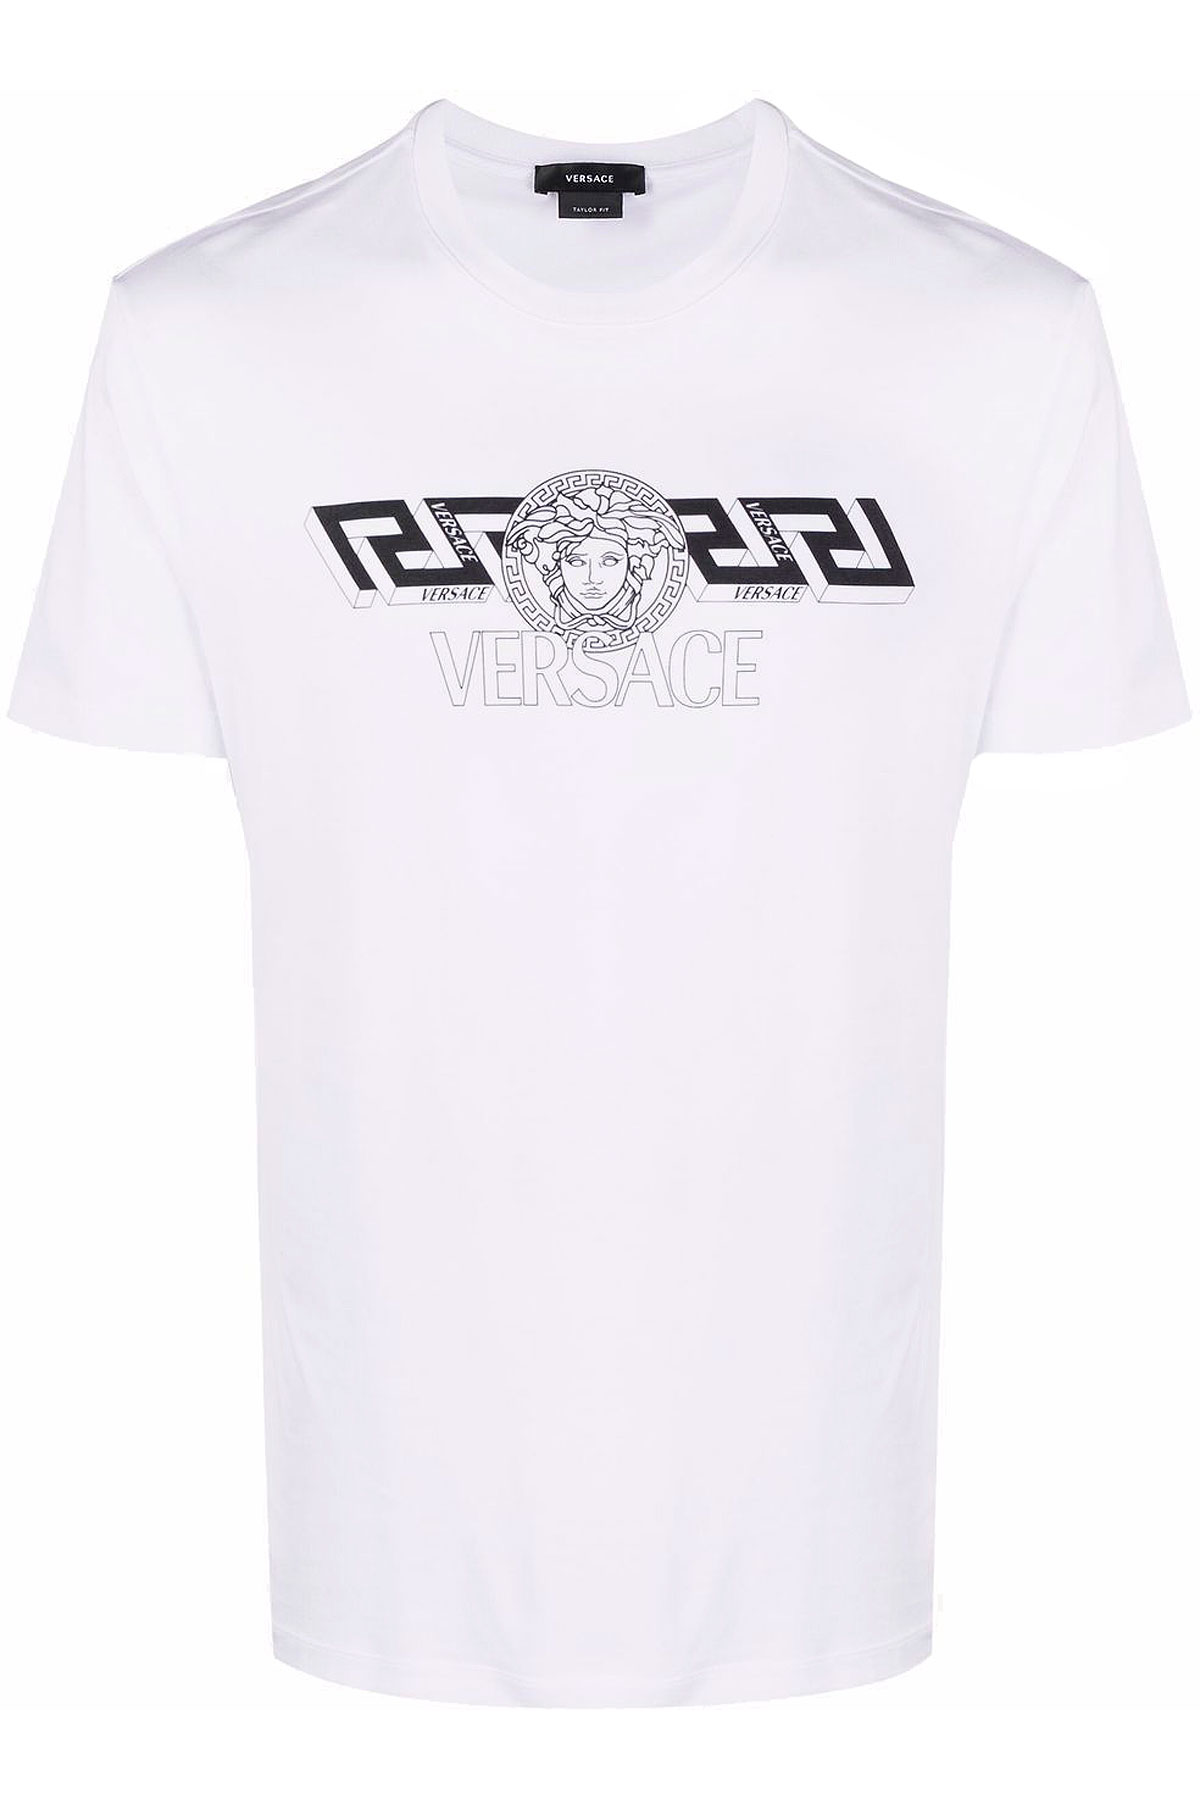 Mens Clothing Versace, Style code: 10039061-a02800-1w000